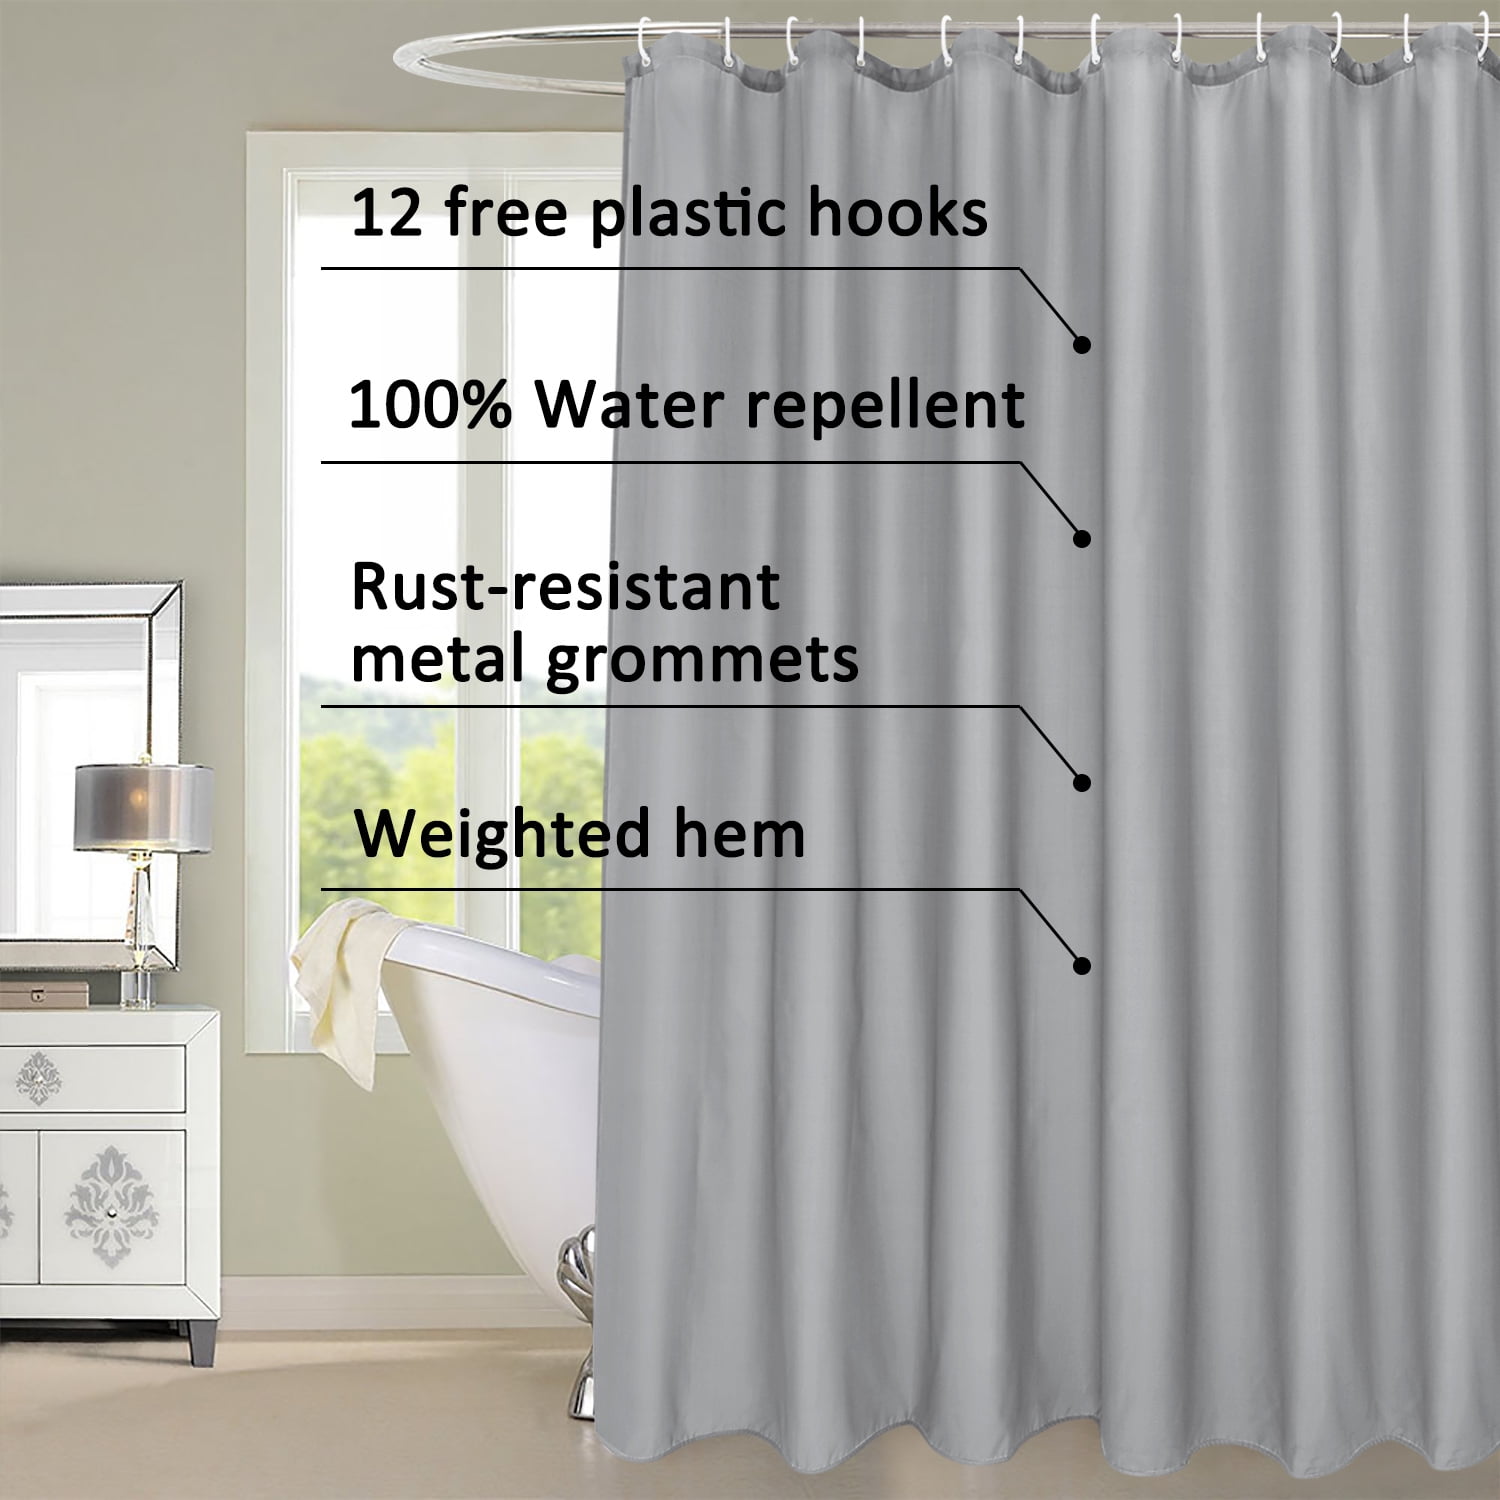 How to clean your shower curtain and liner, according to pros